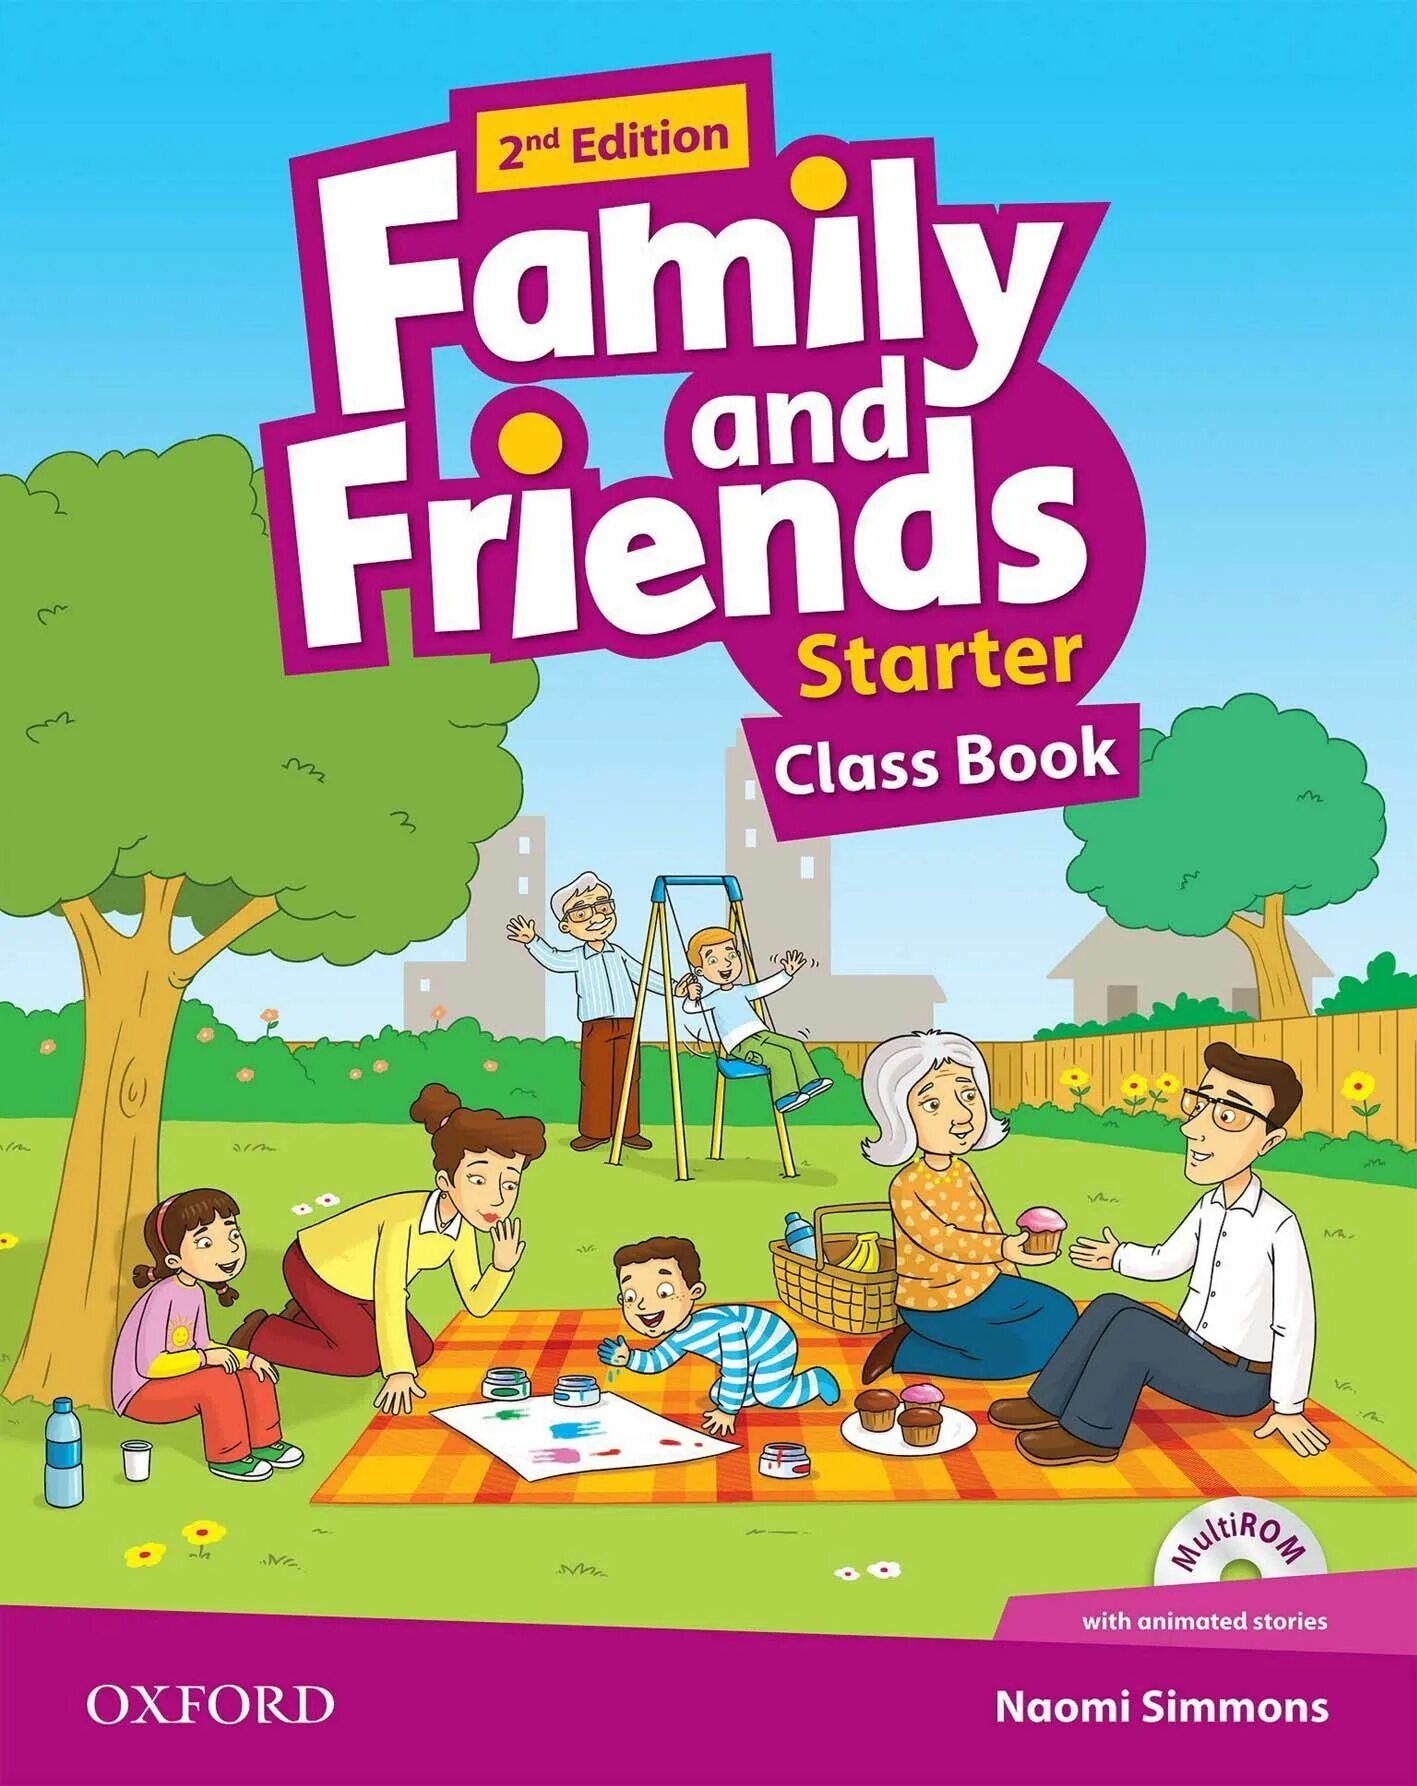 Family and friends students. Family and friends 2 Edition Classbook. Family and friends 2 class book Starter. Учебник Oxford Family and friends 2. 2nd Edition Family and friends Starter Workbook.